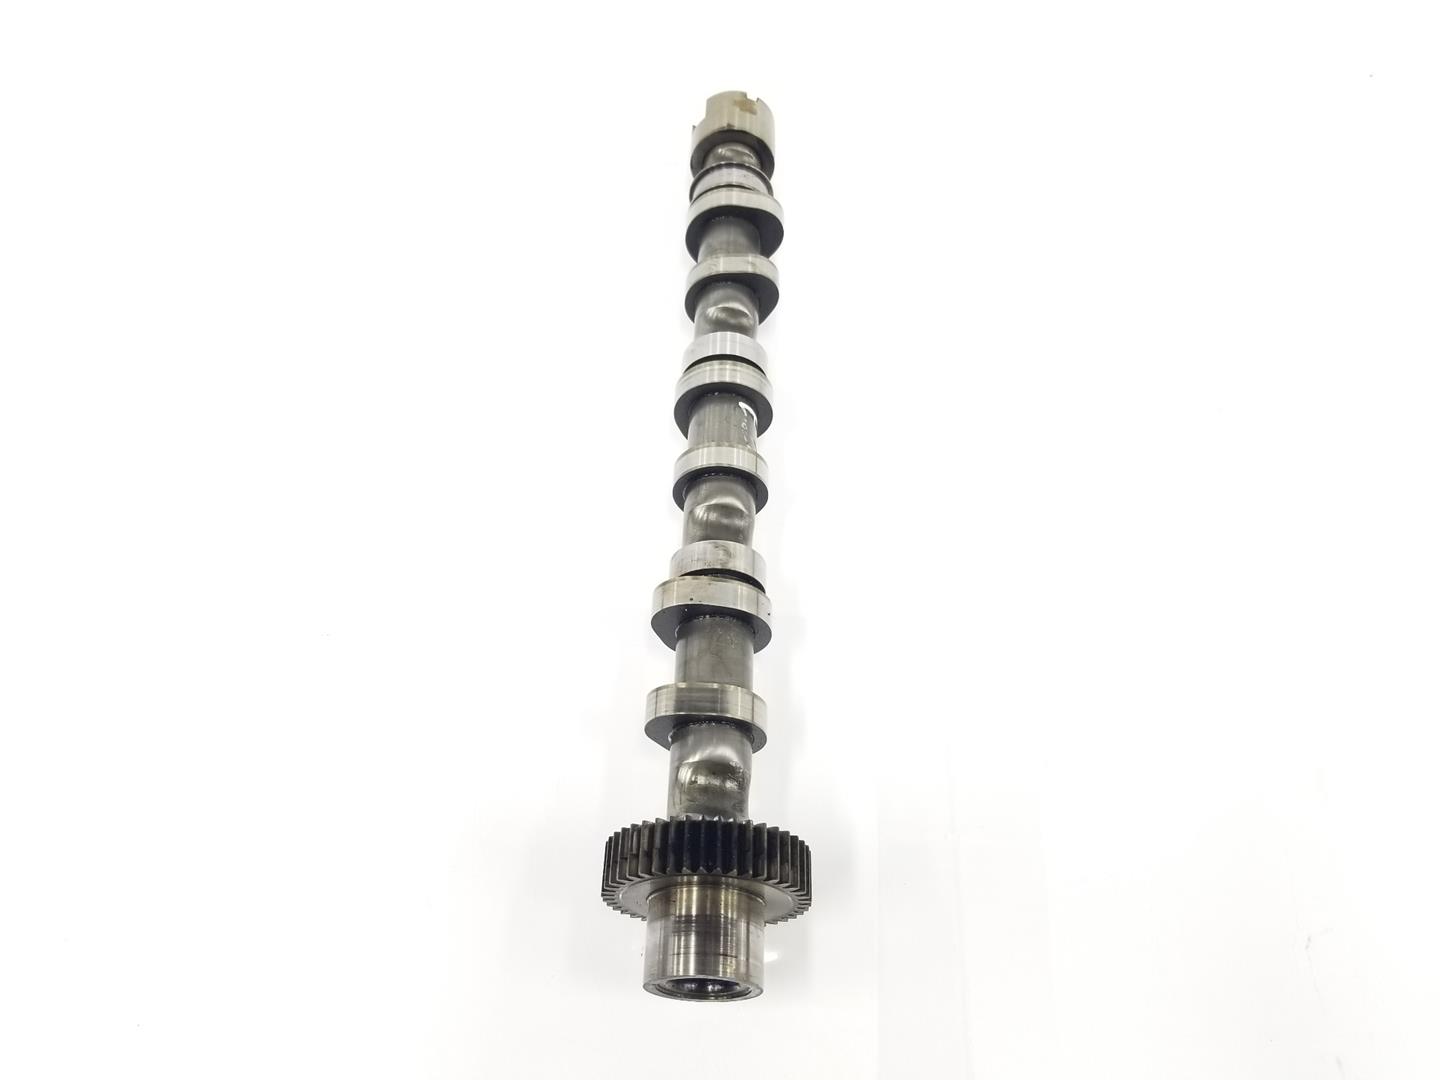 VOLKSWAGEN Touareg 1 generation (2002-2010) Exhaust Camshaft 059109022BE, 059109022BE, CILINDROS1-3 19782090